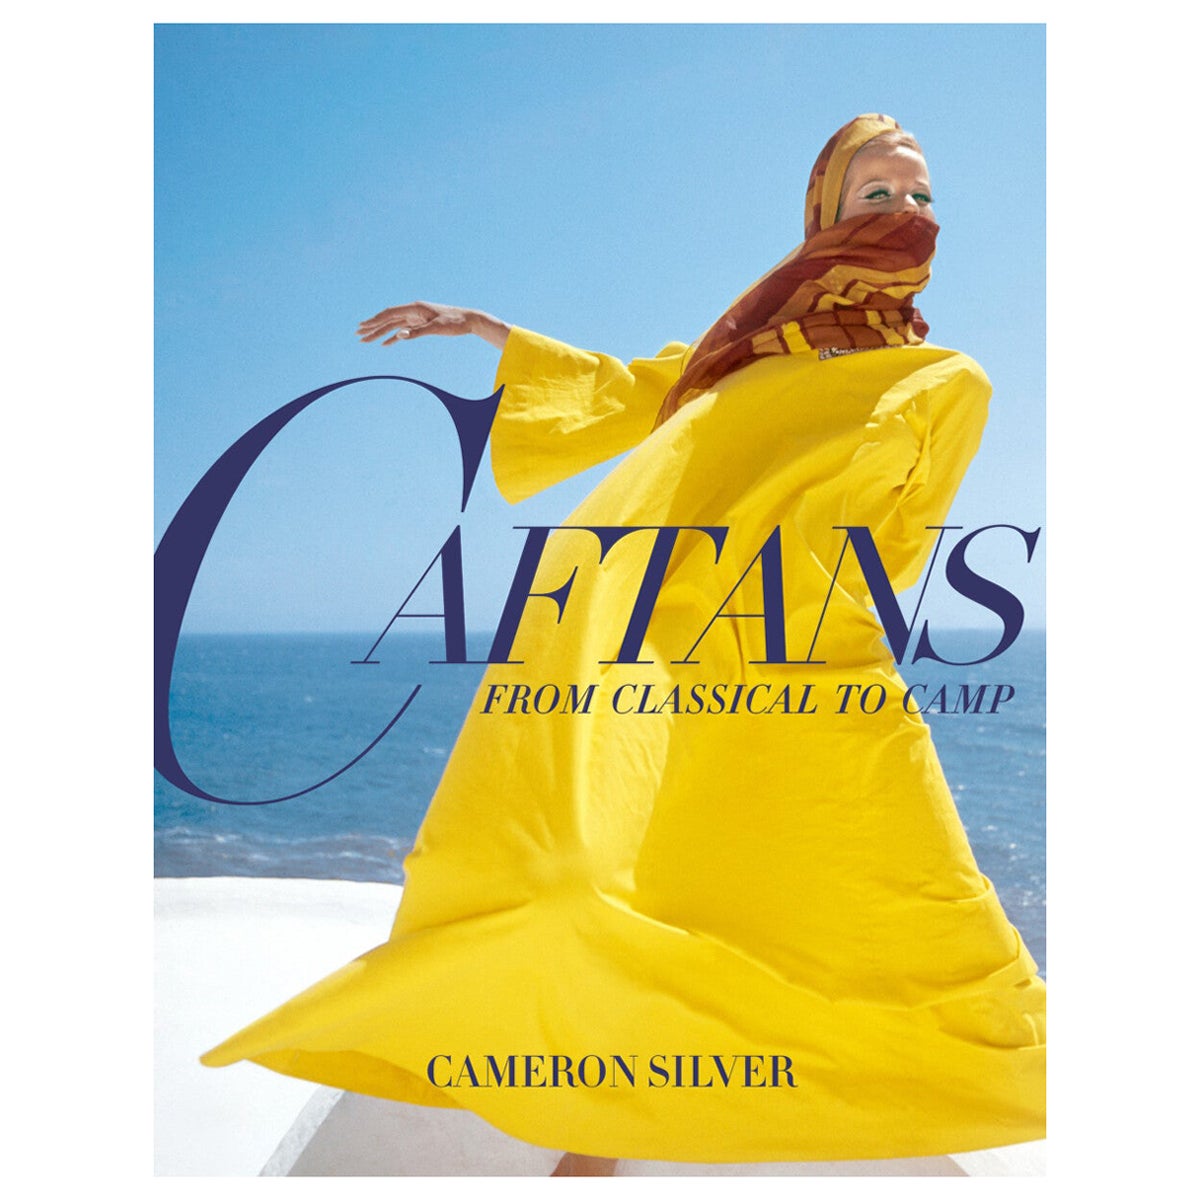 Livre « Caftans From Classical to Camp » de Cameron Silver